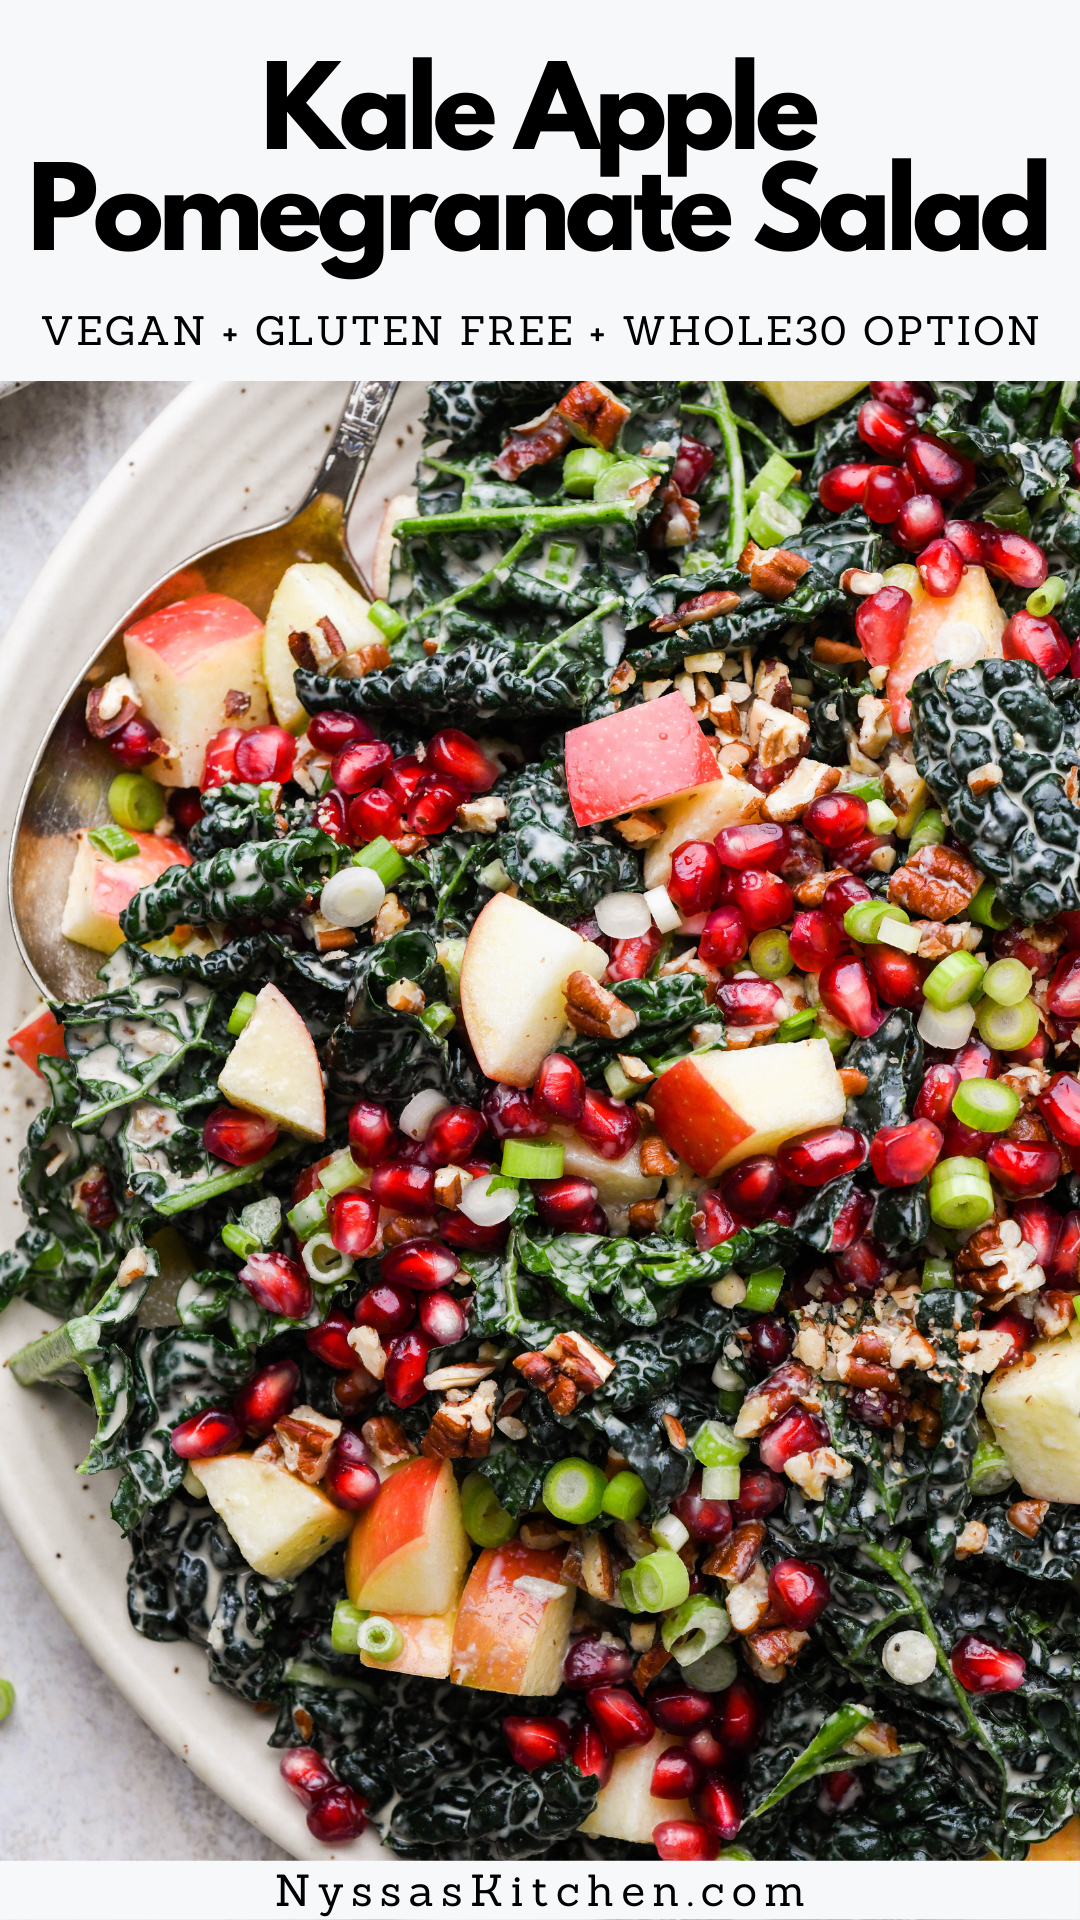 This kale apple pomegranate salad is a bright and festive winter salad that's perfect for the holidays and every day dinners! Made with nutrient dense ingredients like kale, apples, pecans, green onions, pomegranate, and a creamy tahini based dressing. It would make a delicious and colorful addition to your Thanksgiving or Christmas dinner. Gluten free, vegan, paleo, Whole30 option.